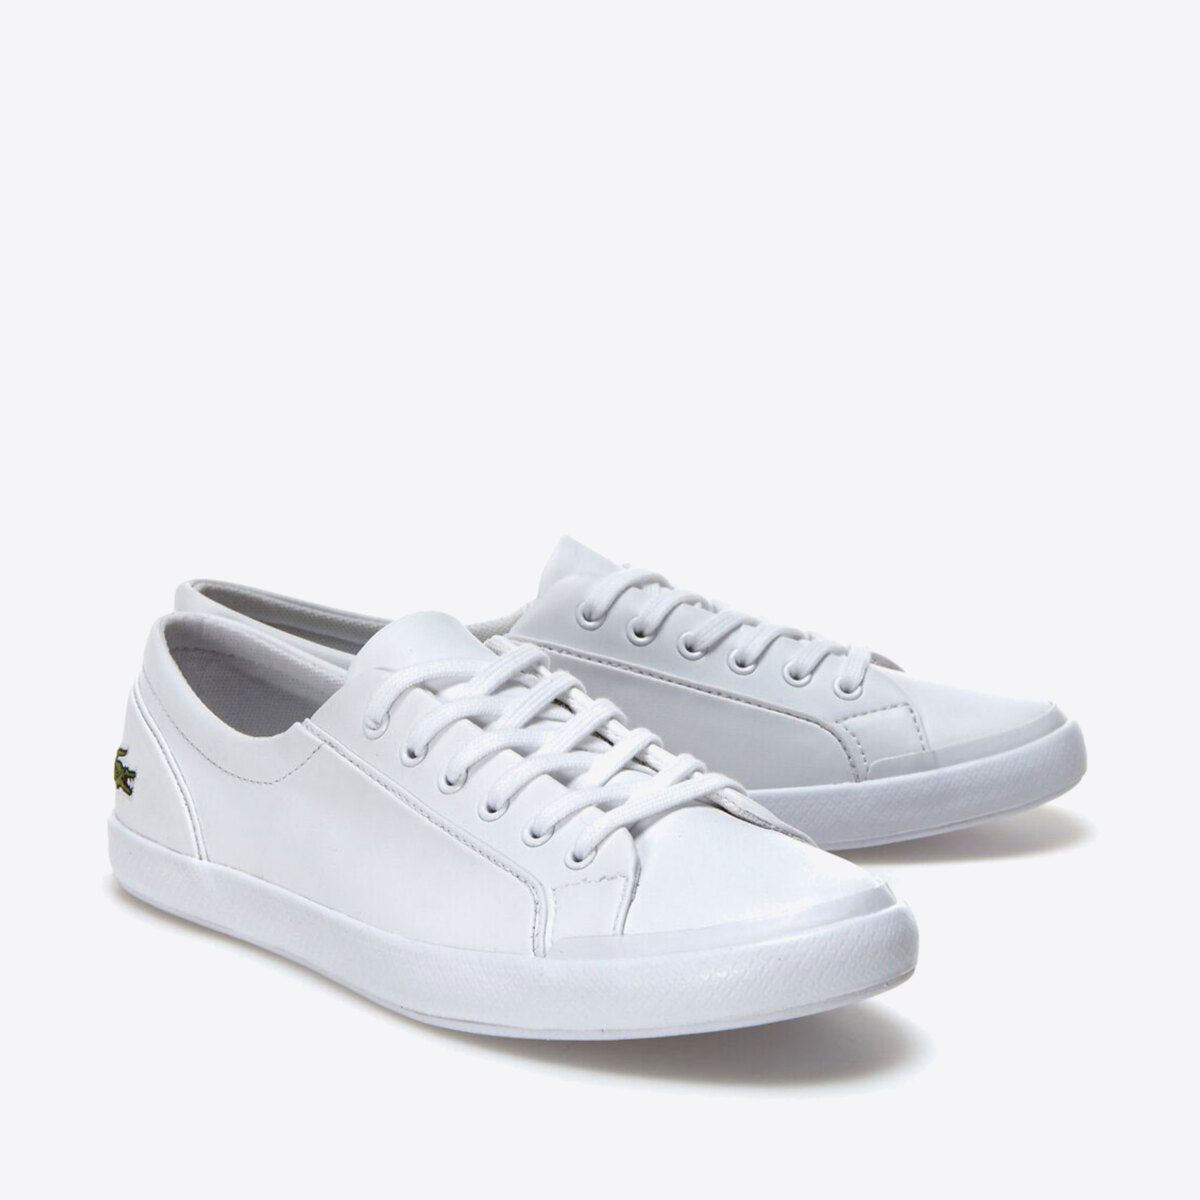 LACOSTE Lancelle Leather Trainer White - Image 0